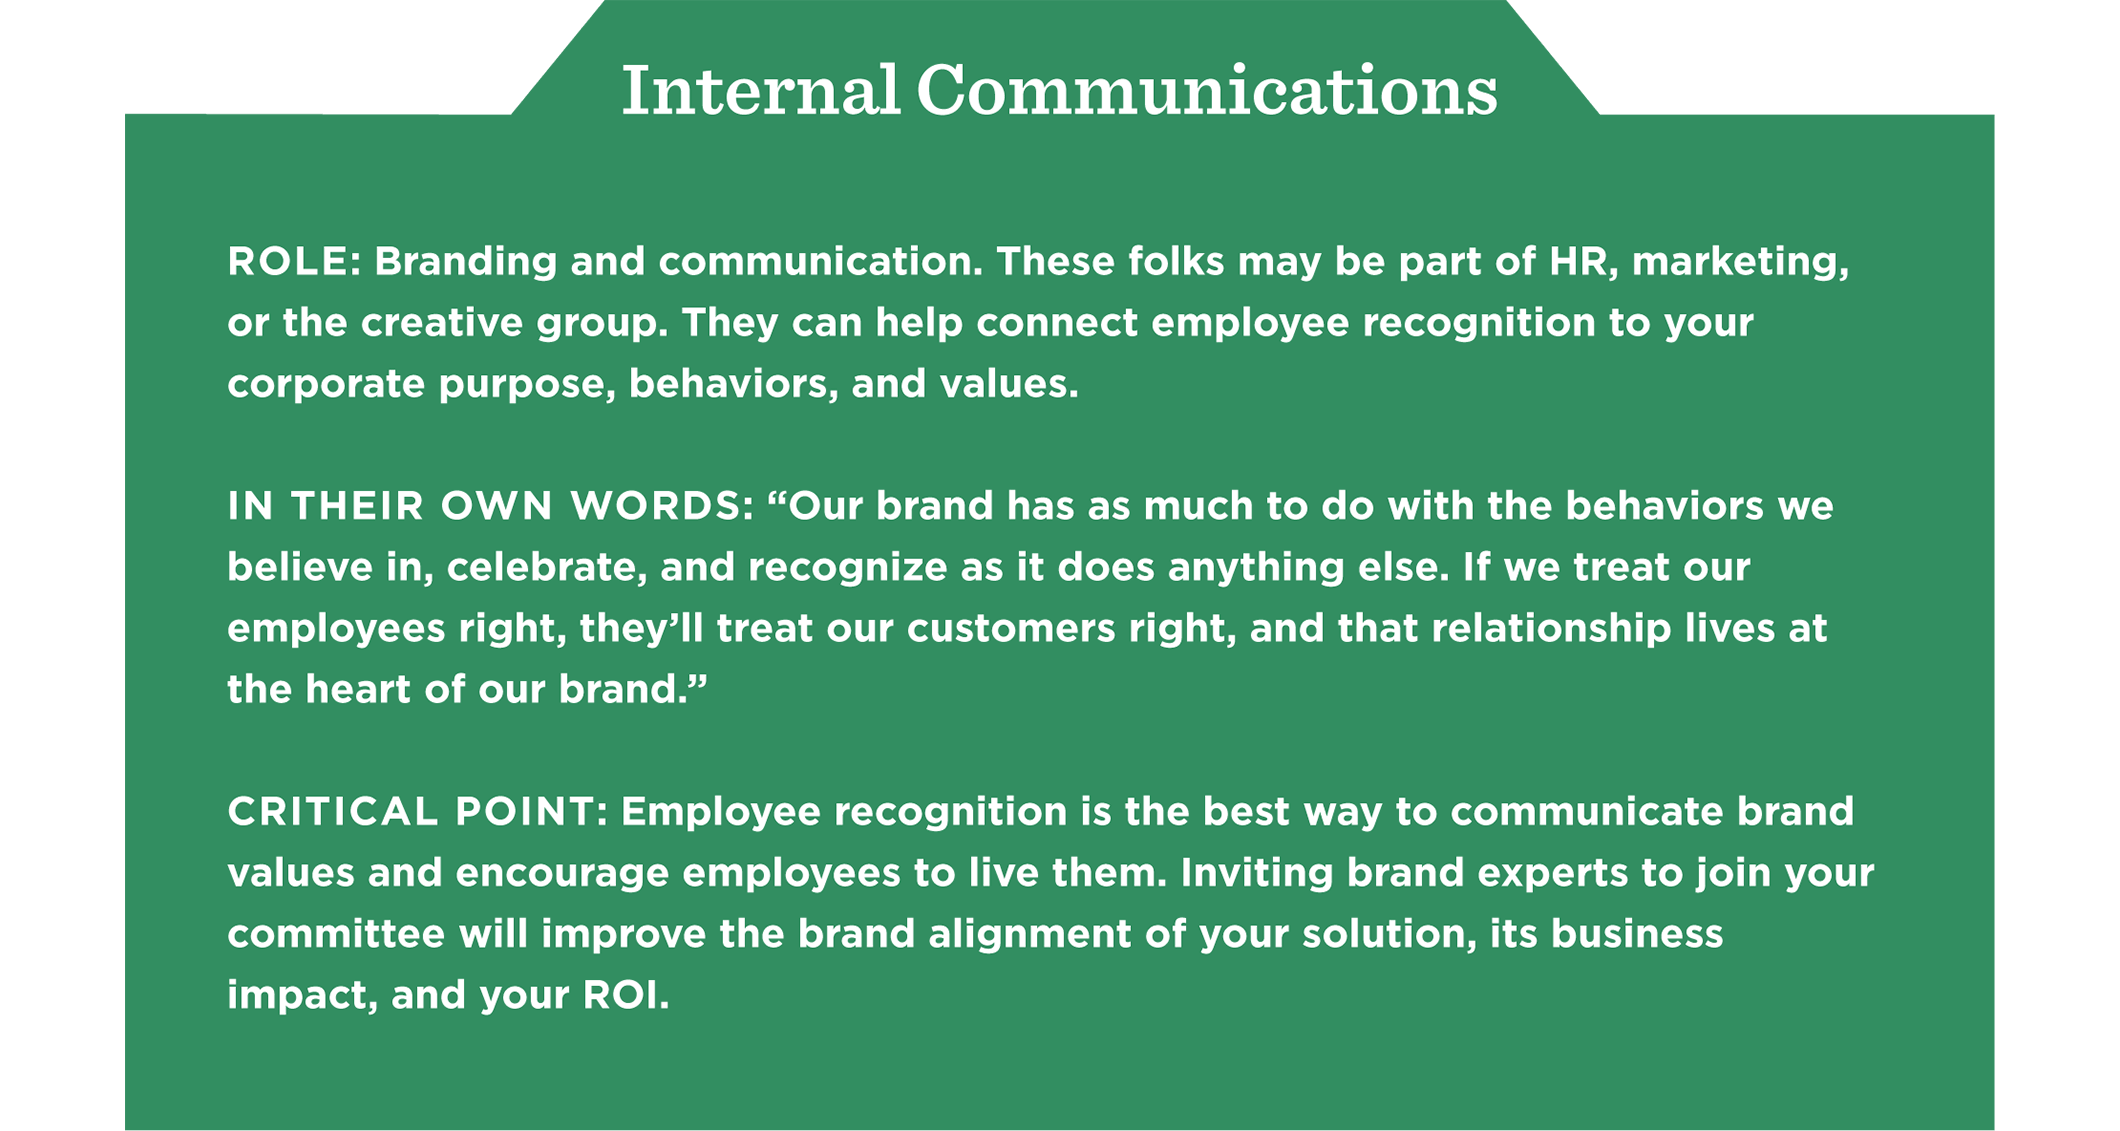 Employee recognition is the best way to communicate brand values and encourage employees to live them. Inviting brand experts to join your committee will improve the brand alignment of your solution, its business impact, and your ROI.